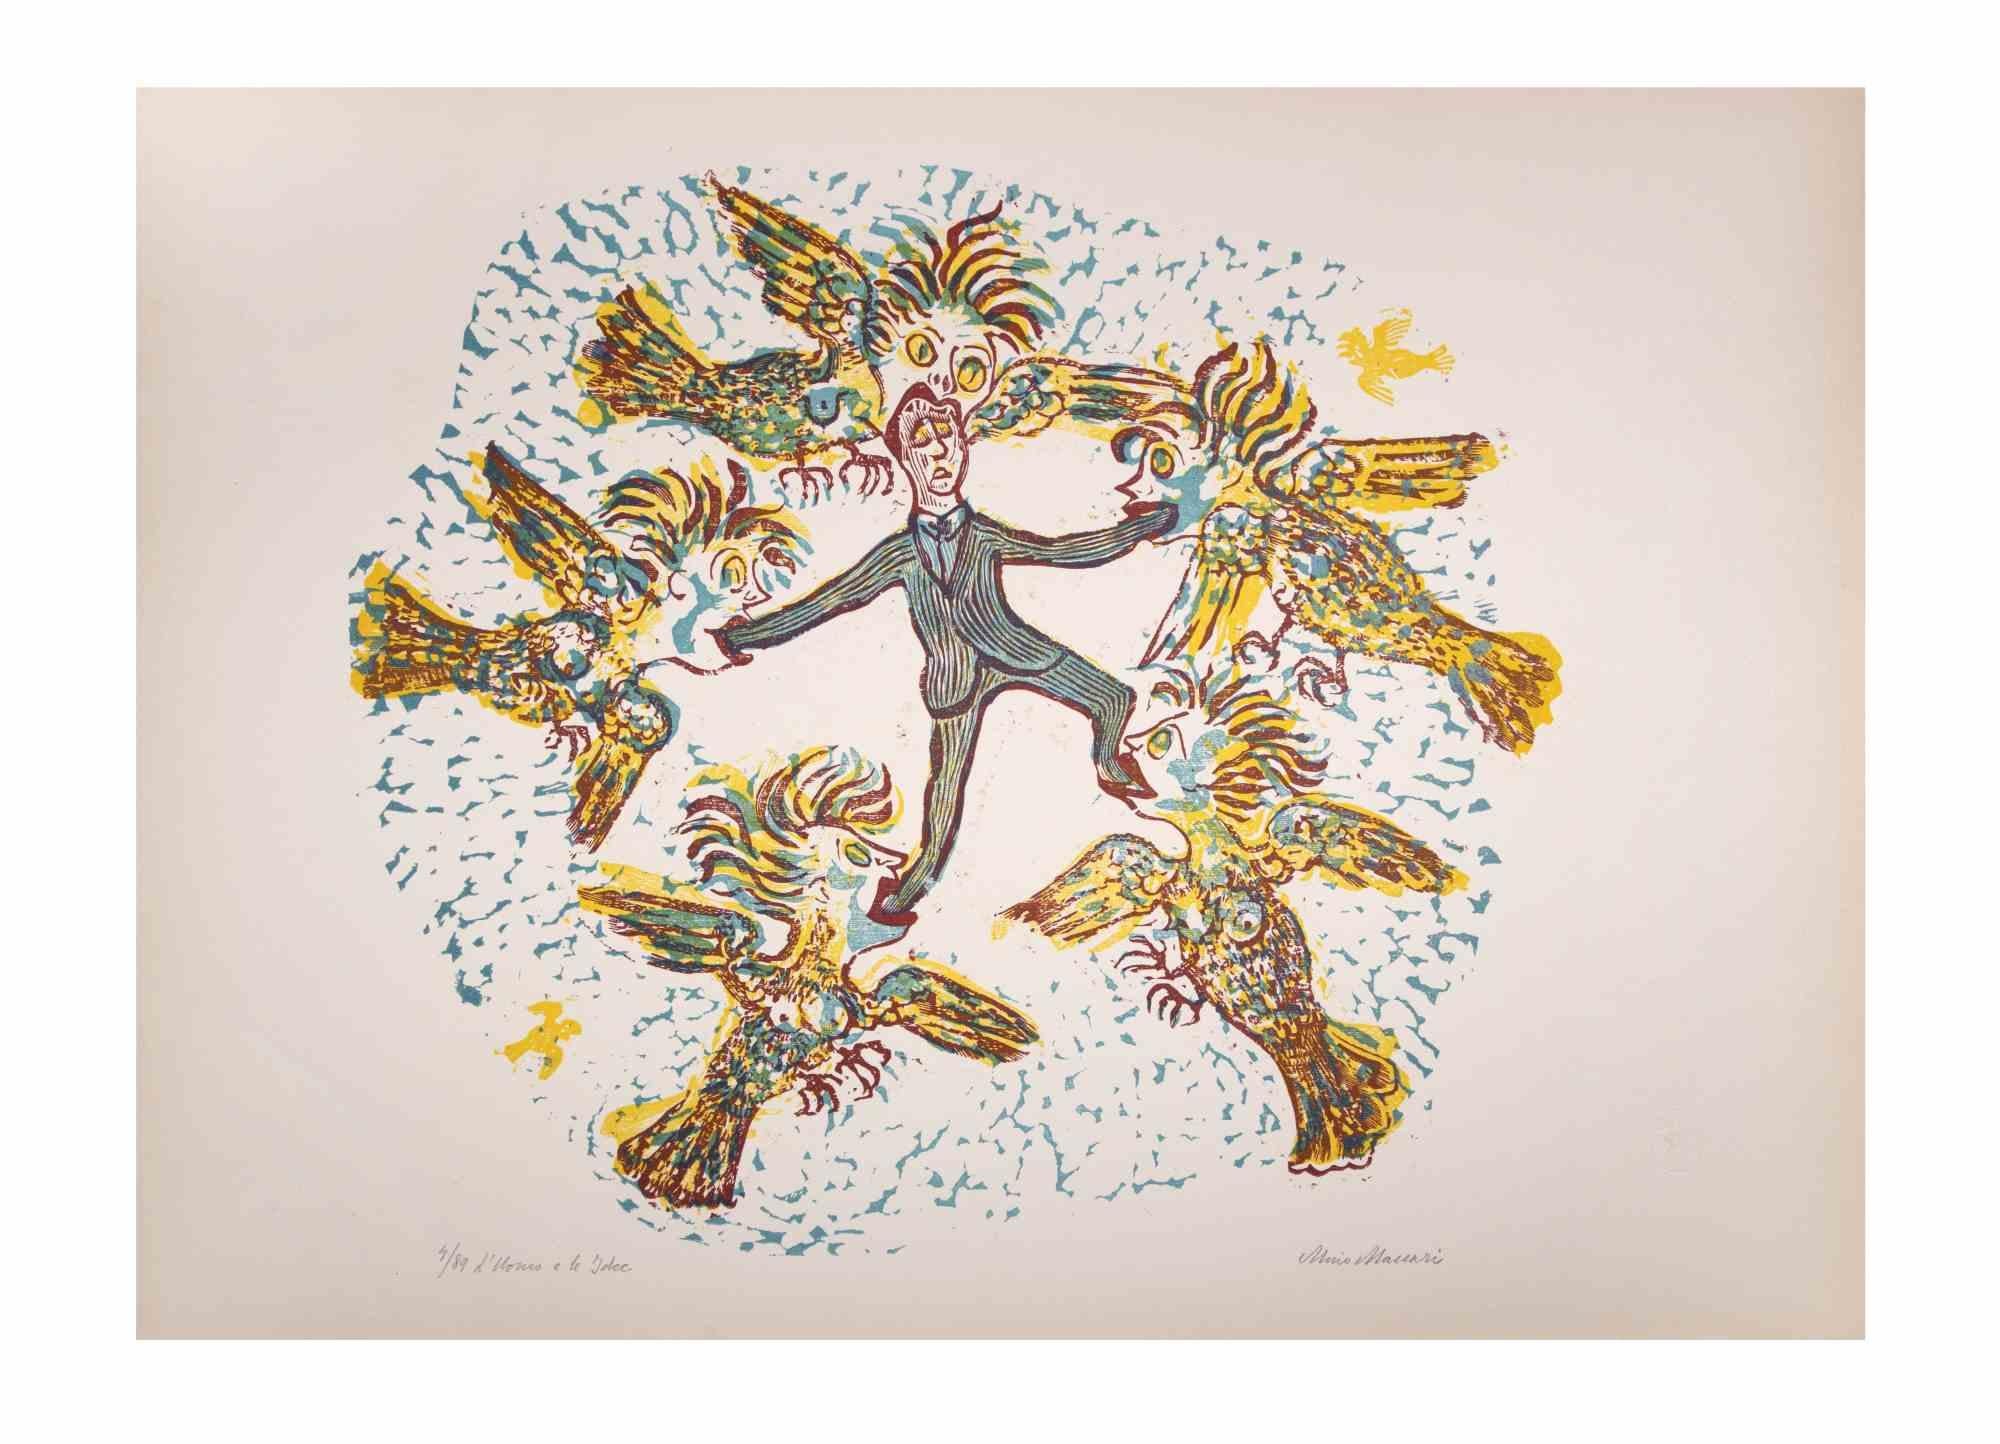 The man and the ideas is an Artwork realized by Mino Maccari  (1924-1989) in the Mid-20th Century.

Colored woodcut on paper. Hand-signed on the lower, numbered 4/89 specimens and titled on the left margin.

Good conditions.

Mino Maccari (Siena,